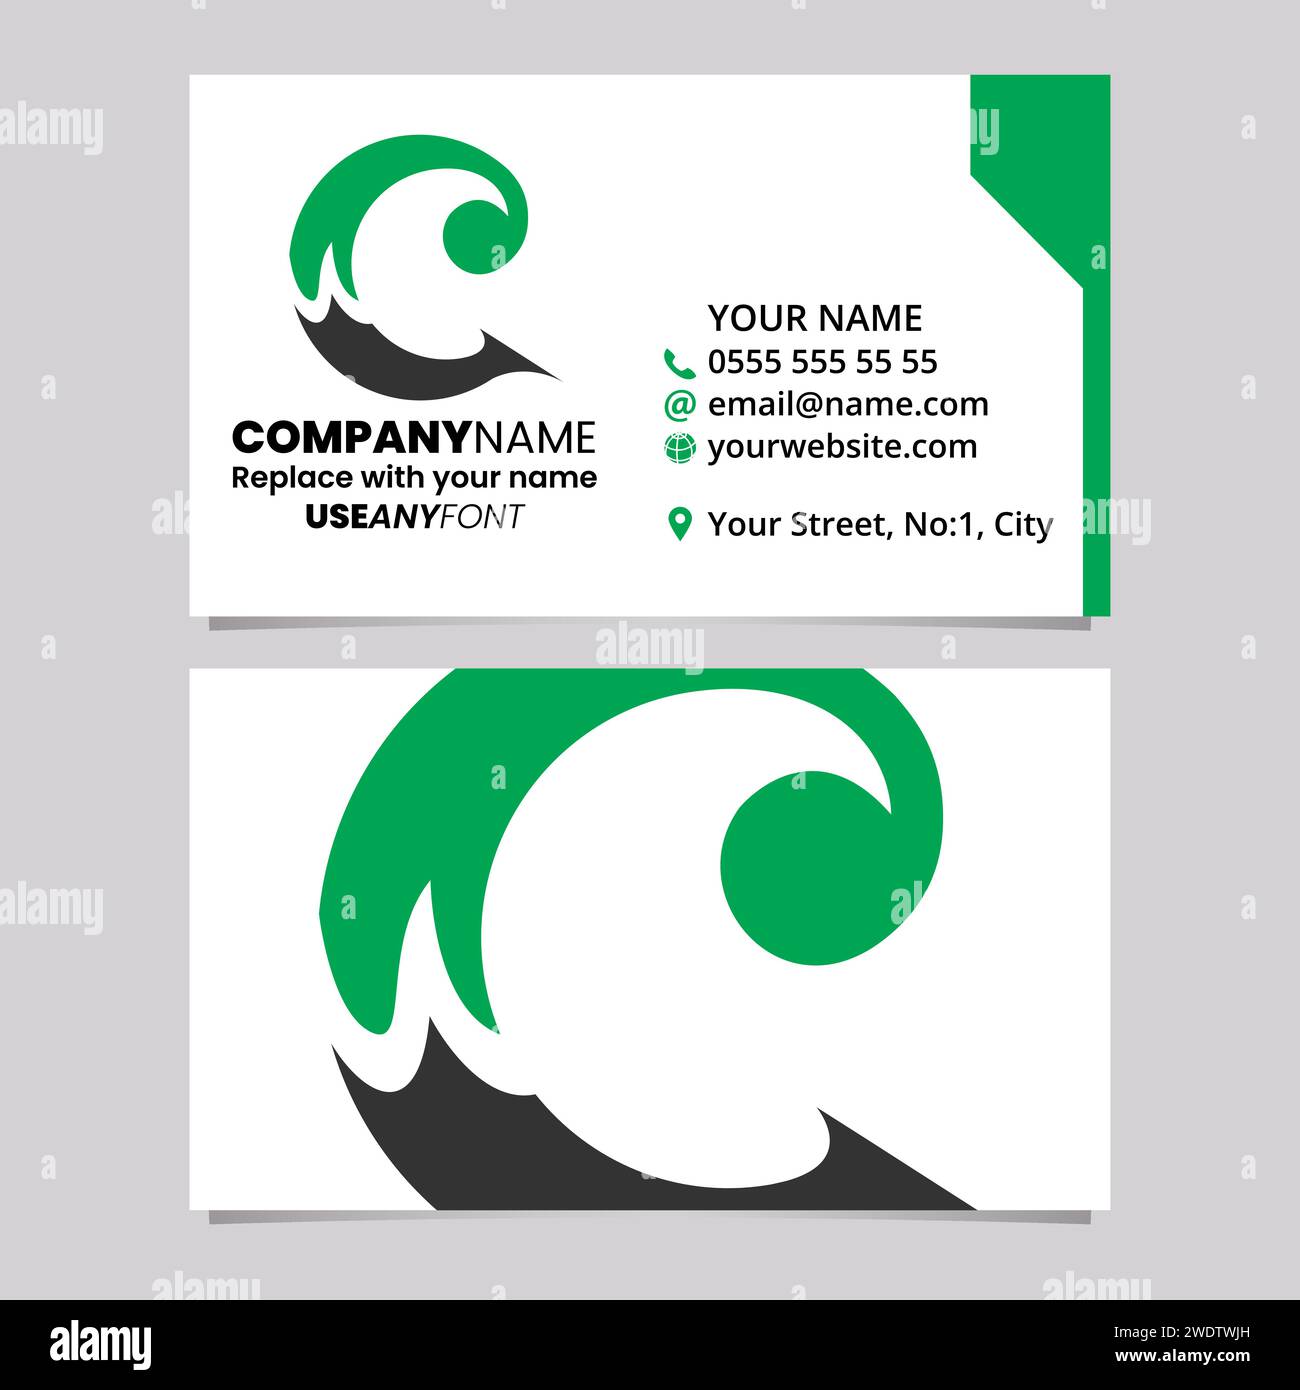 Green and Black Business Card Template with Round Curly Letter C Logo Icon Over a Light Grey Background Stock Vector